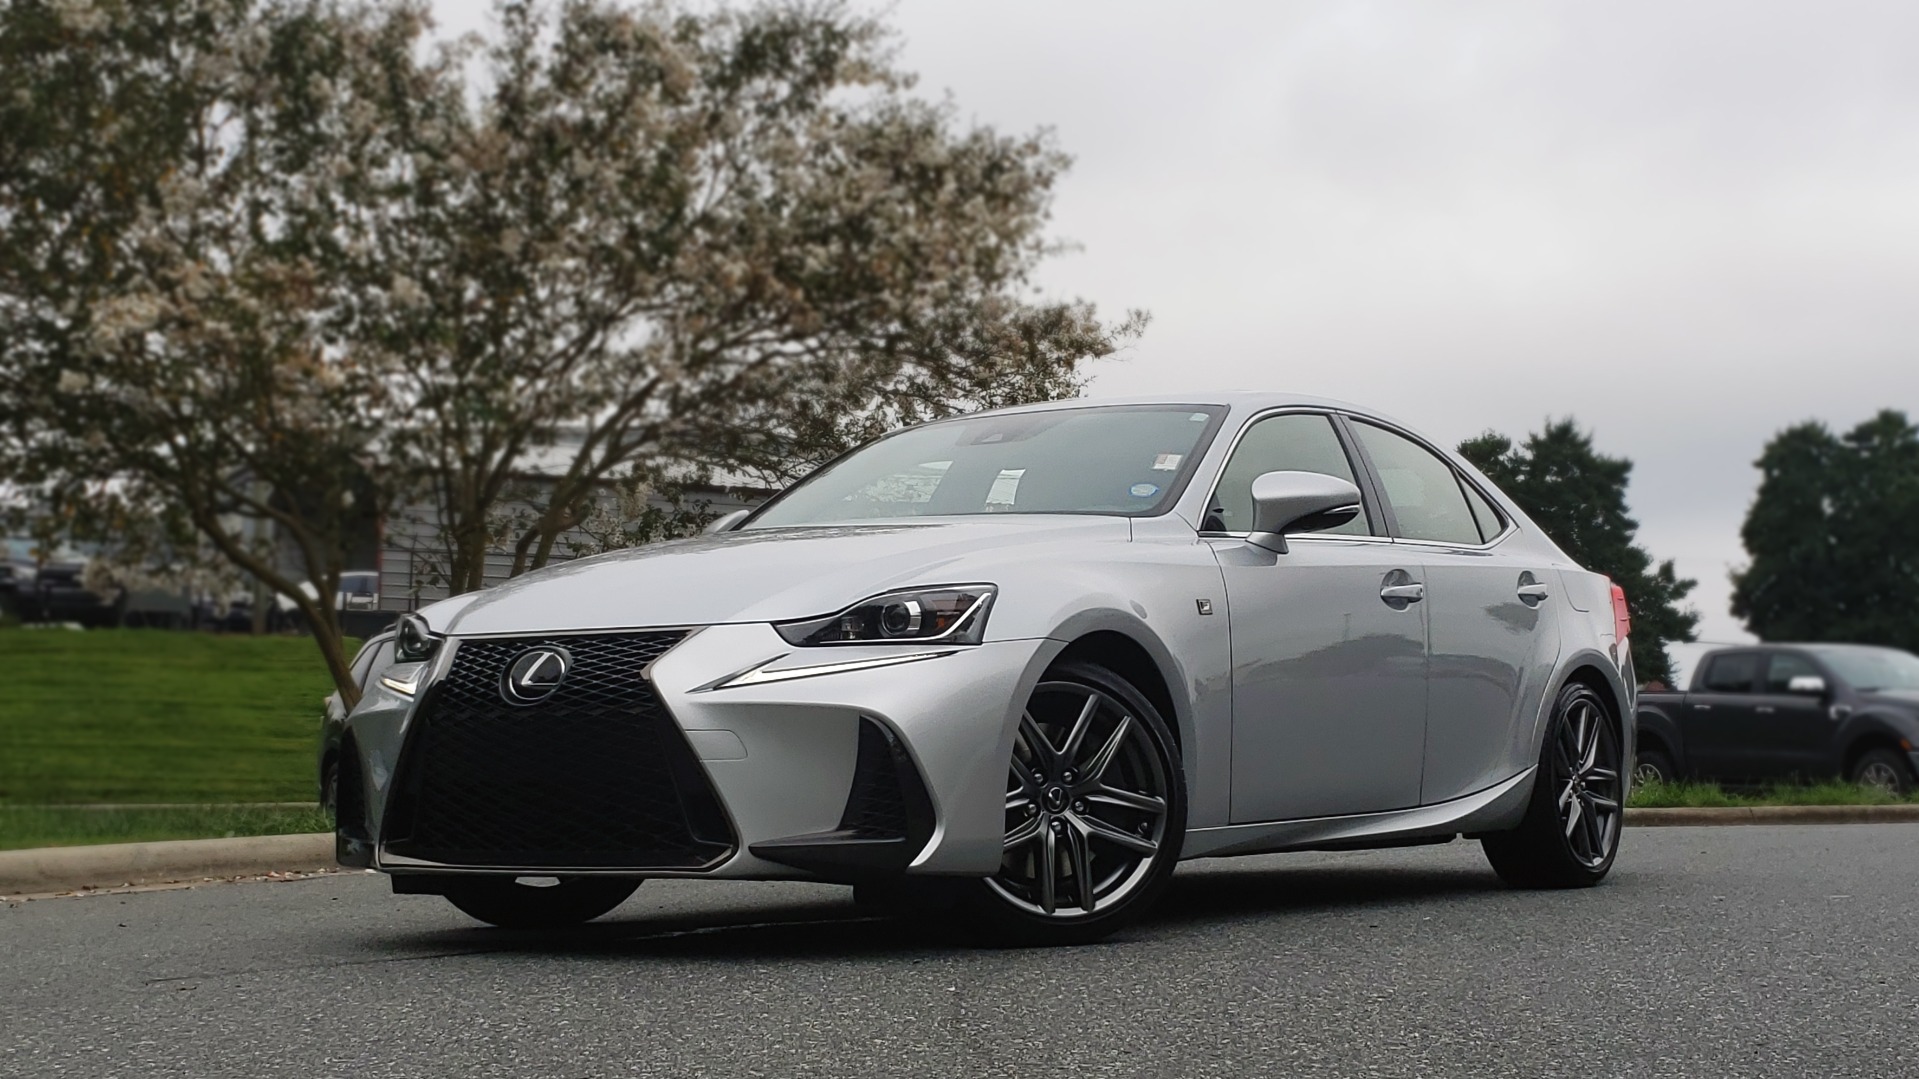 Used 2017 Lexus IS 200T F-SPORT / LEATHER / SUNROOF / 18IN WHEELS / REARVIEW for sale Sold at Formula Imports in Charlotte NC 28227 1